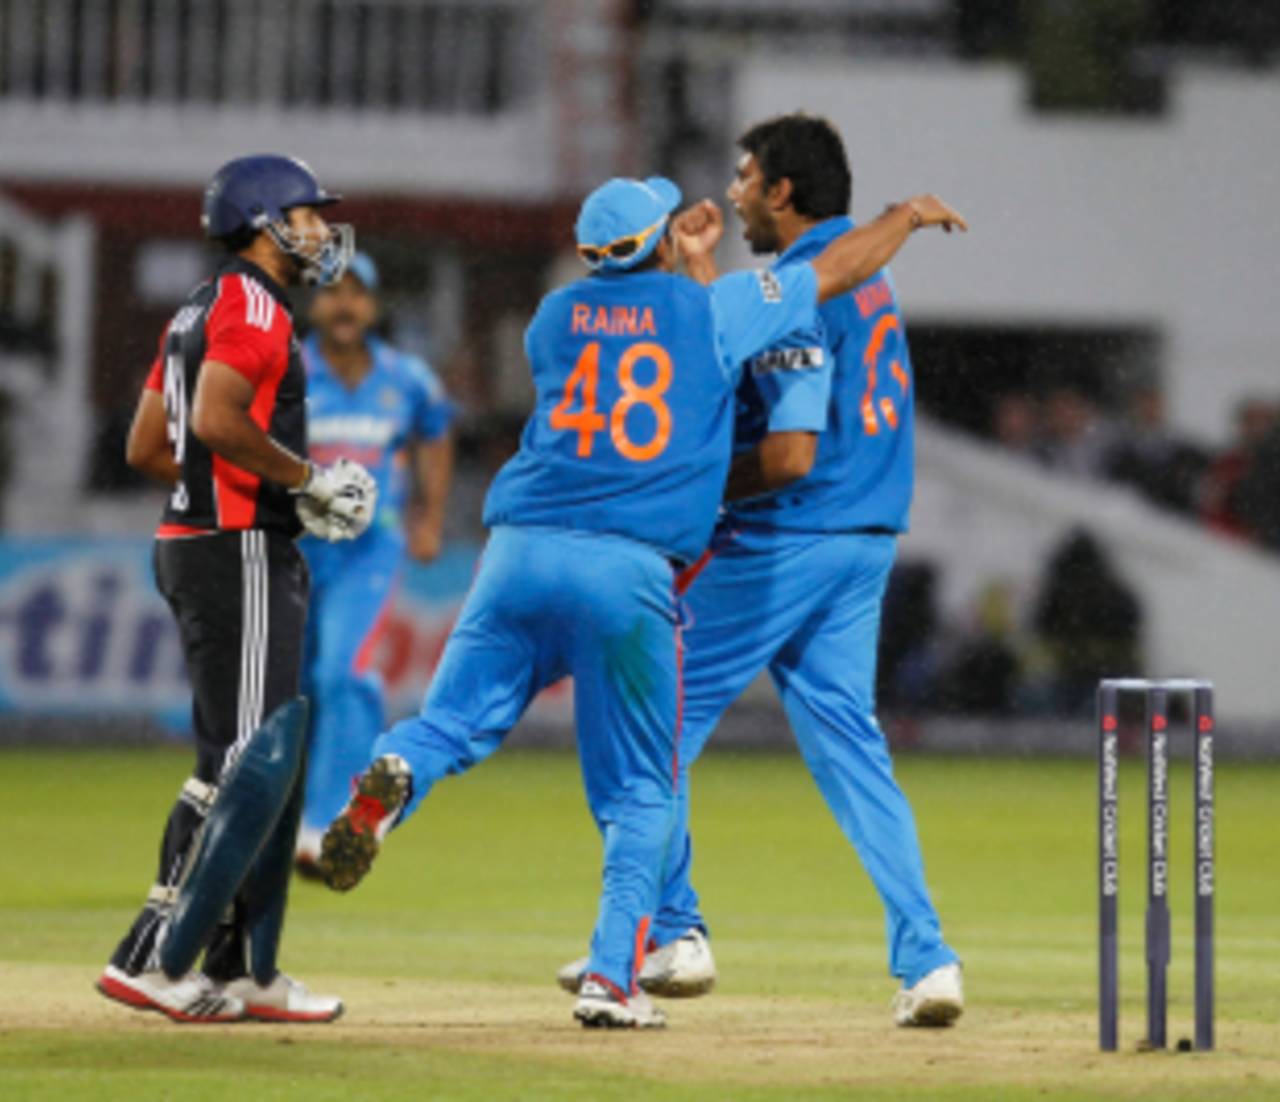 Munaf Patel was understandably jubilant, having dismissed Ravi Bopara by virtue of knowing the 16 times table by heart&nbsp;&nbsp;&bull;&nbsp;&nbsp;AFP